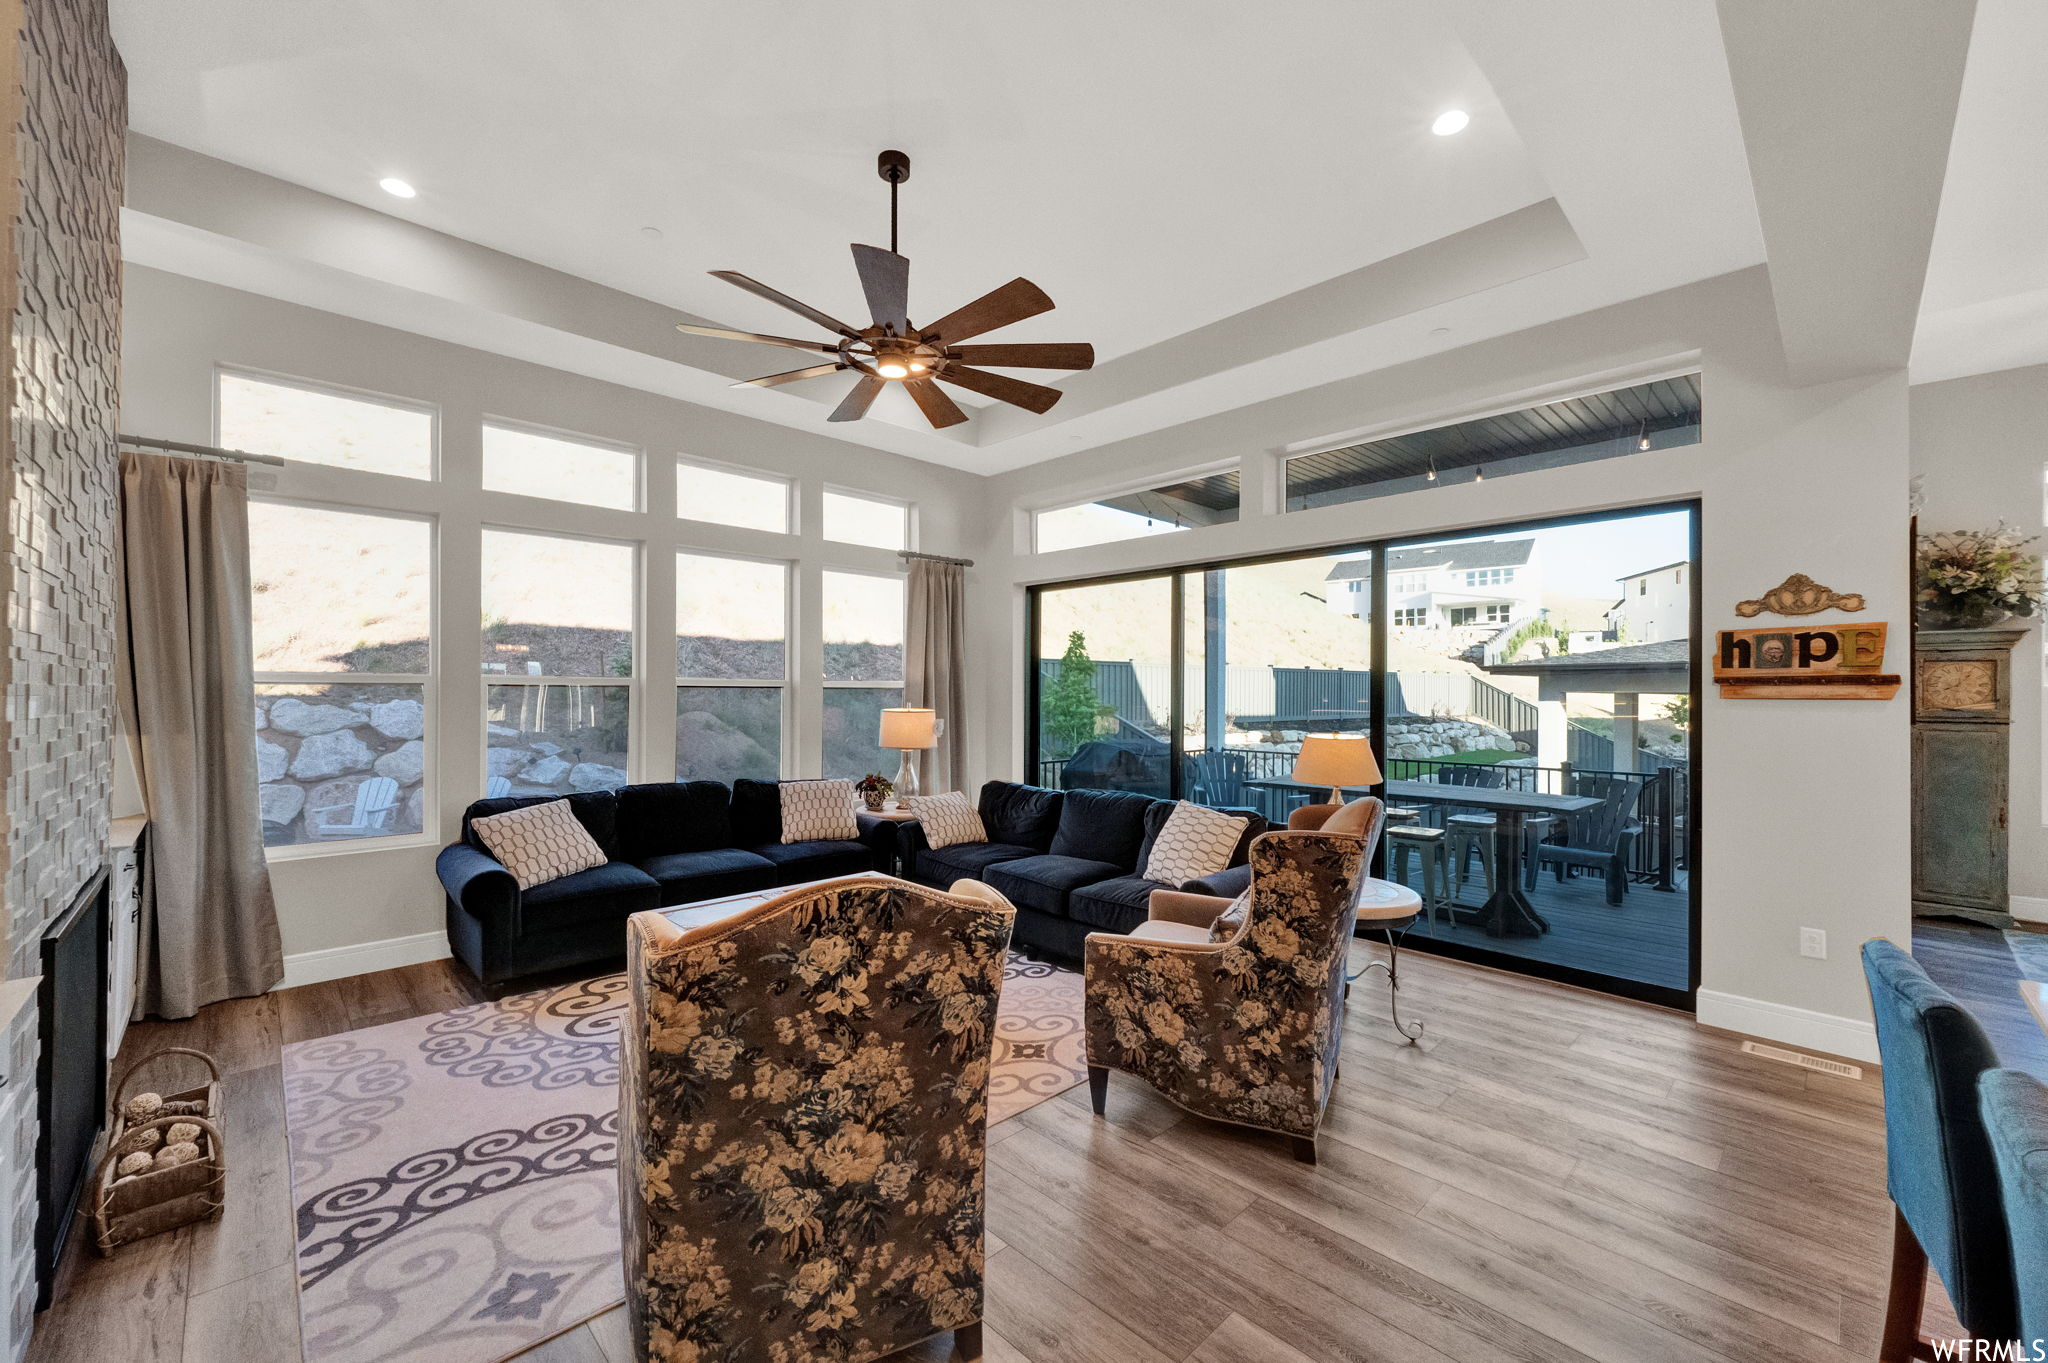 Living room featuring light hardwood floors, a raised ceiling, and ceiling fan